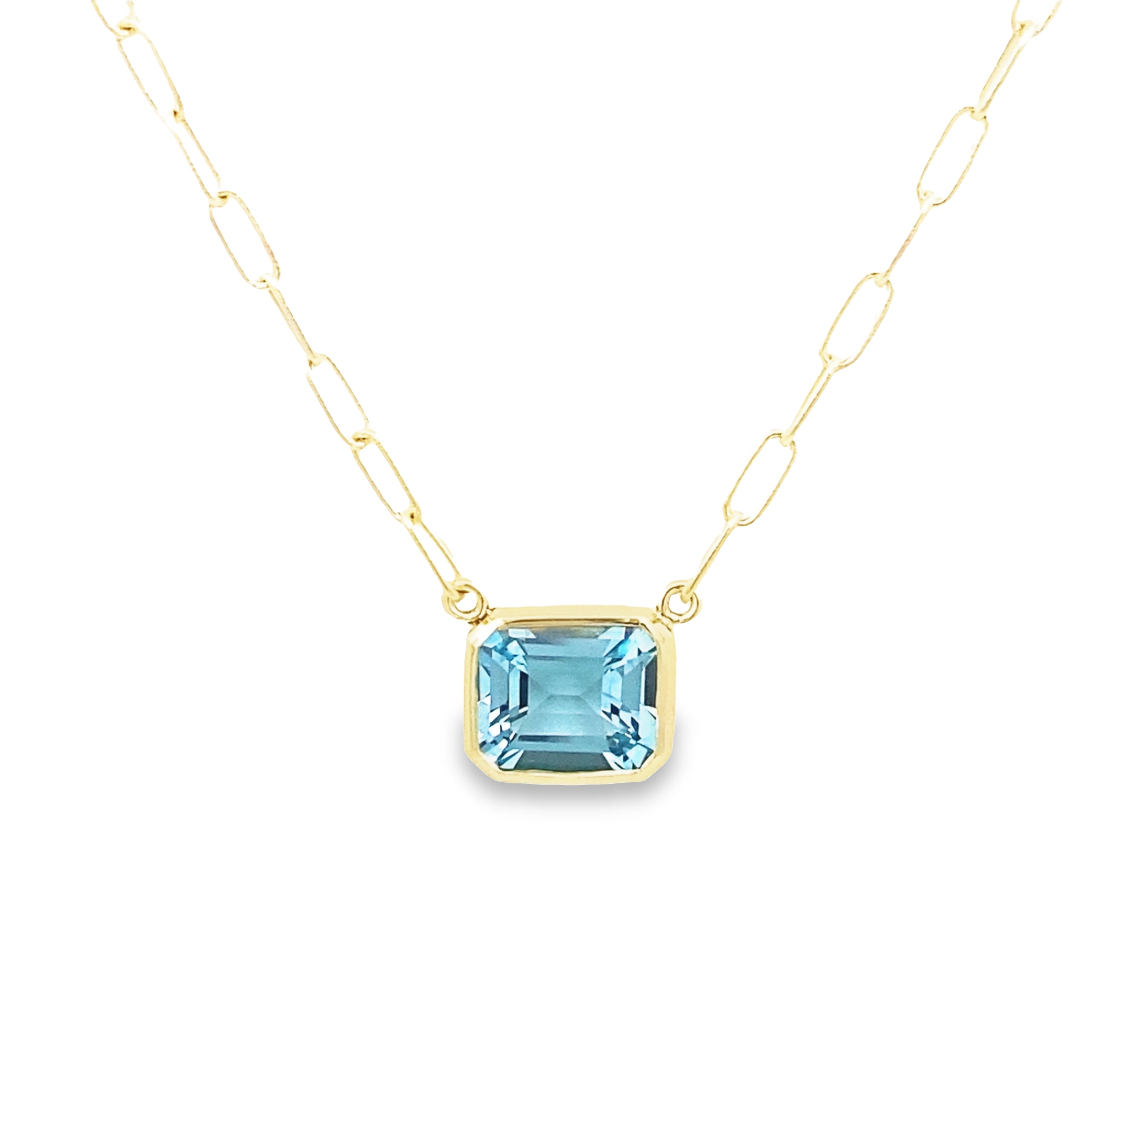 Mazza 14 Karat Yellow Gold Blue Topaz Necklace Measuring 17 Inches